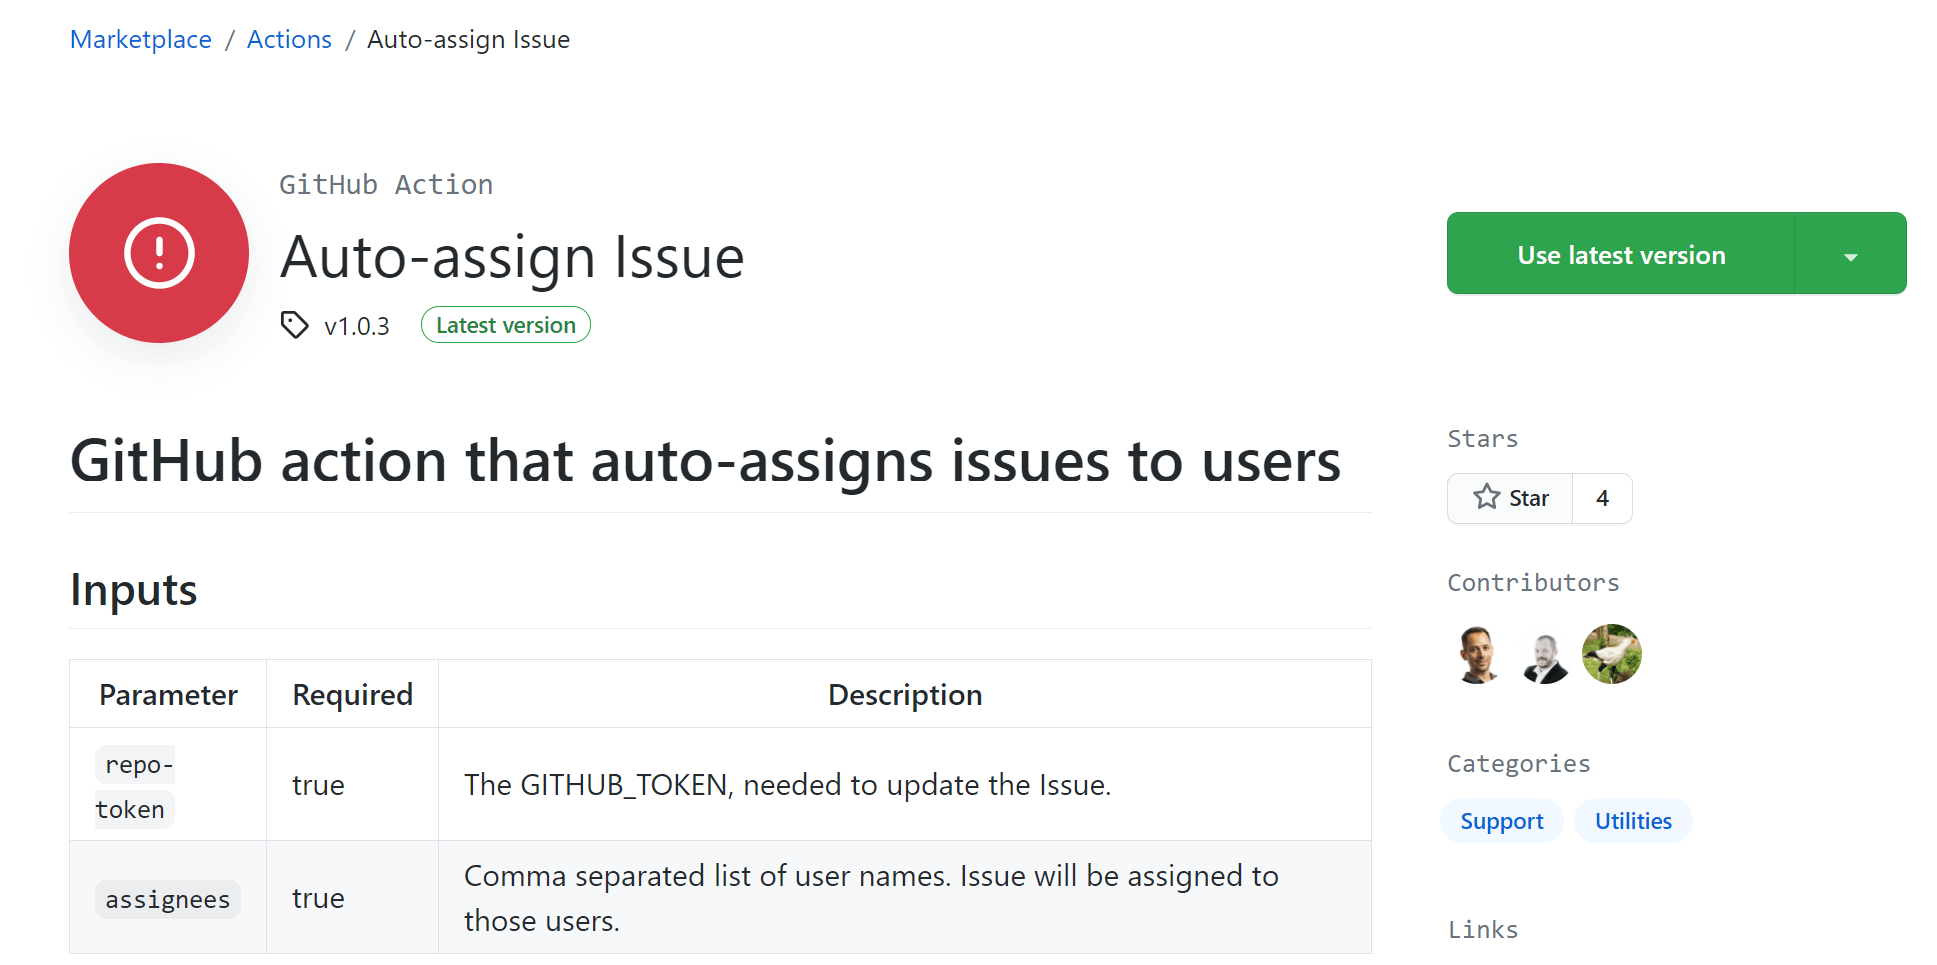 The Auto Assign Issues GitHub action on the marketplace